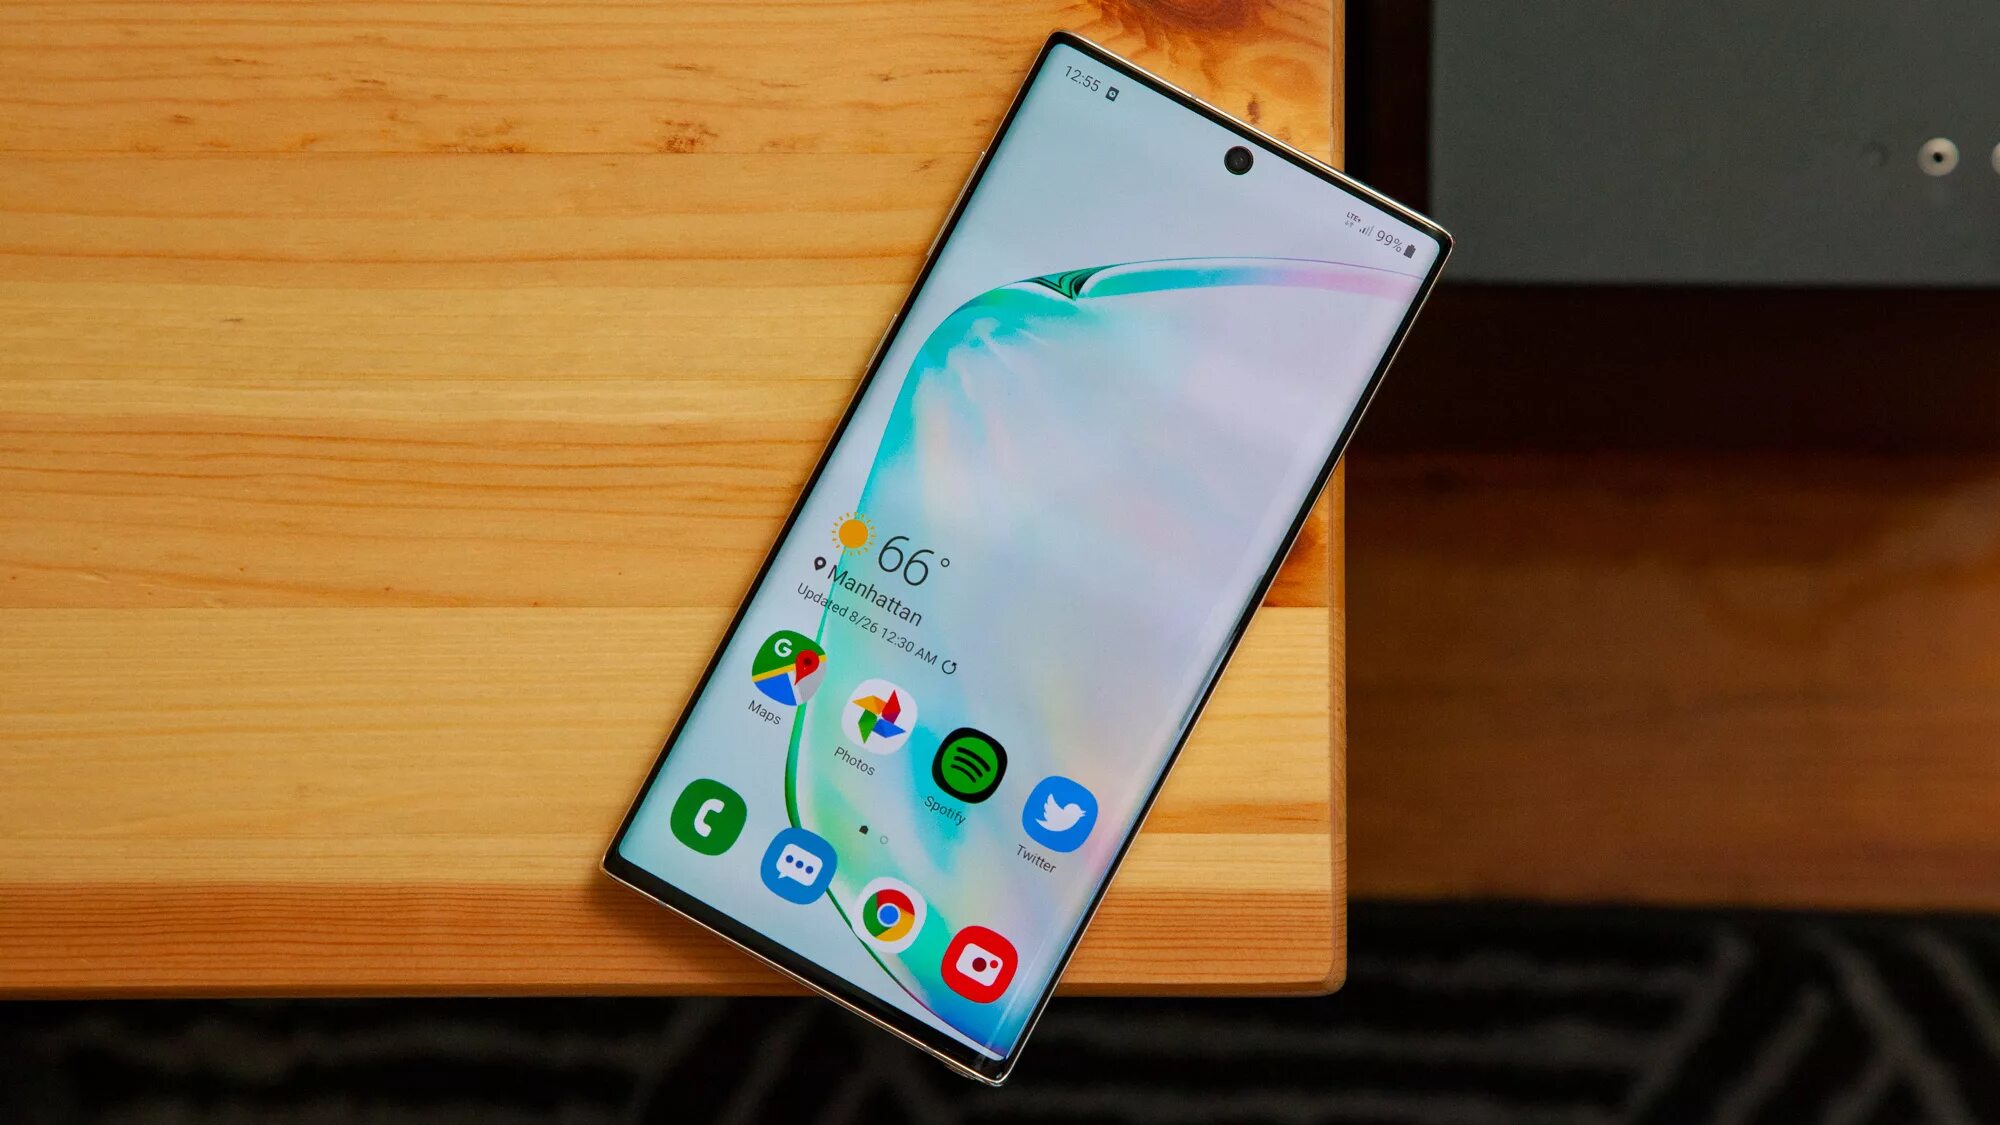 Samsung Galaxy Note 10 Plus. Samsung Note 10 Ultra. Samsung Galaxy Note 10 Lite. Самсунг галакси ноут 10 ультра. Note 20 ultra экран